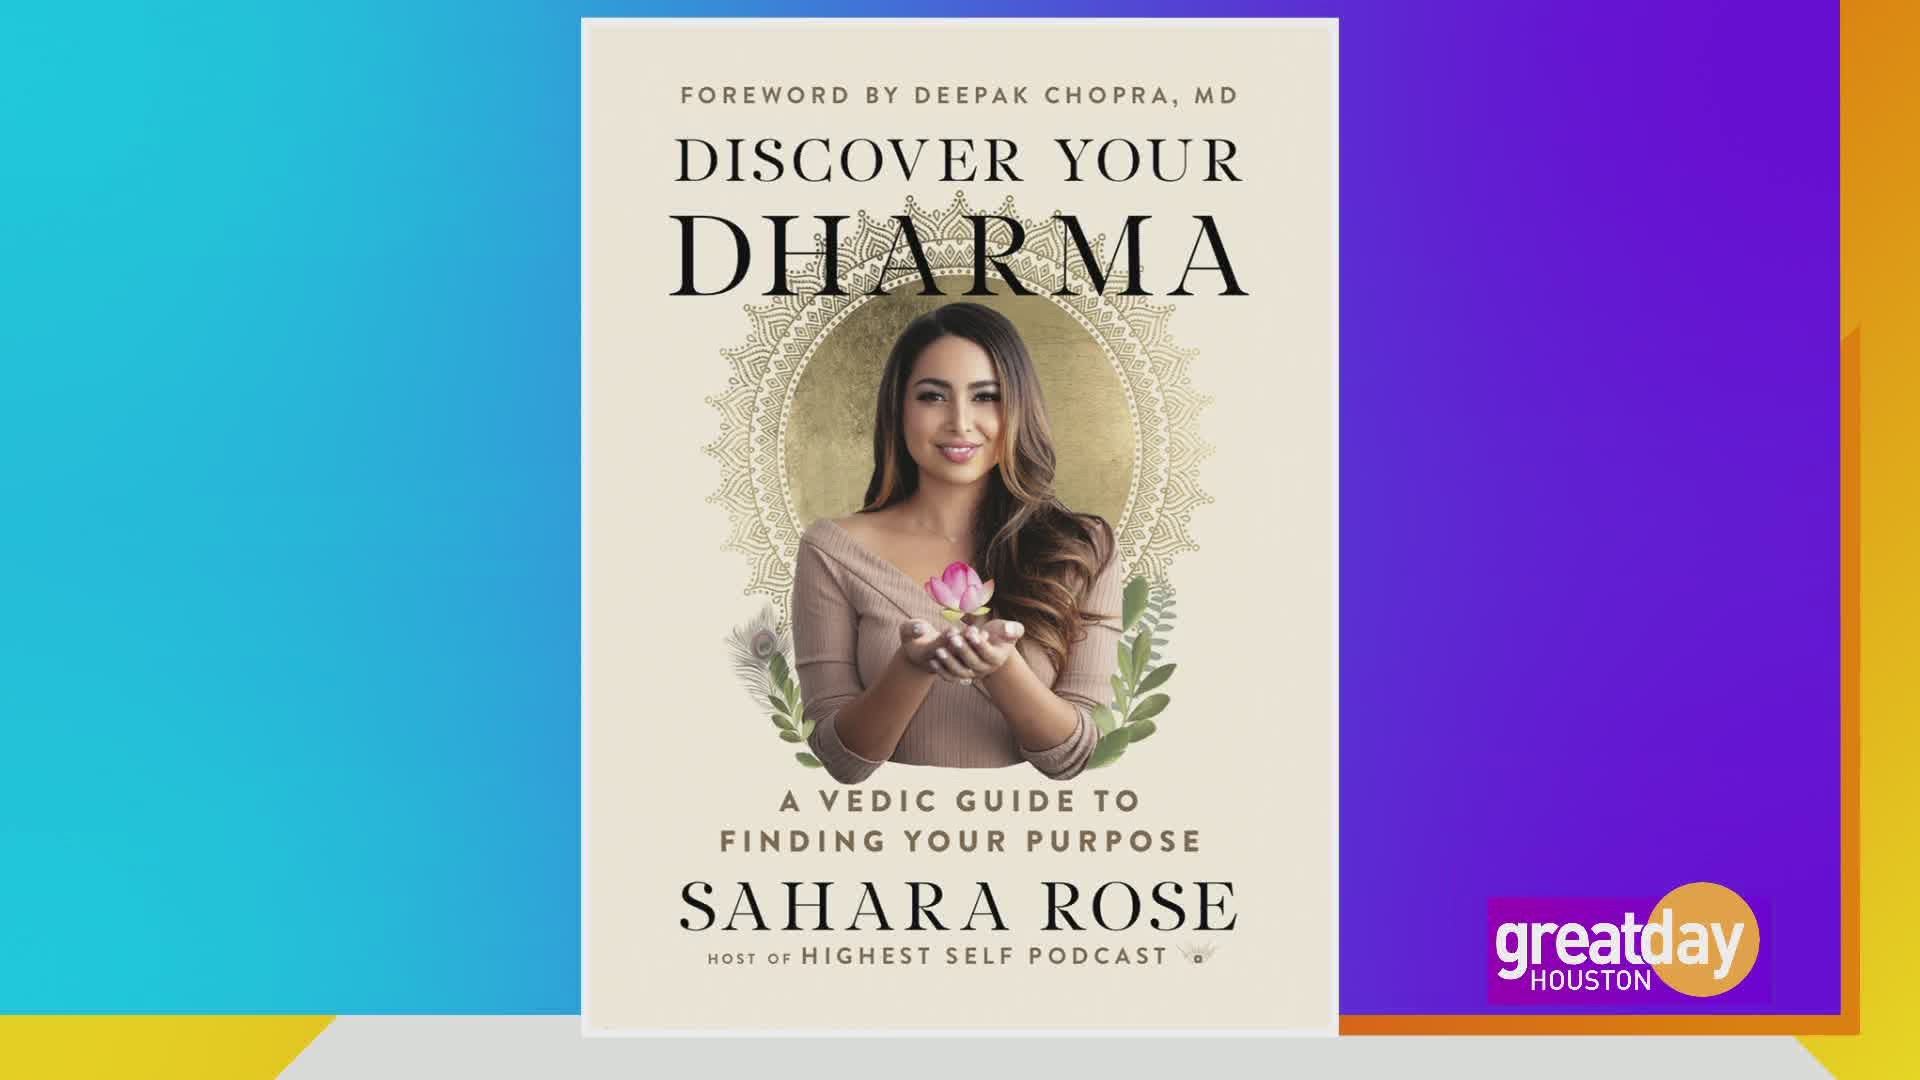 Sahara Rose, Author and host of the wildly popular podcast "The Highest Self" shares how to find your purpose.